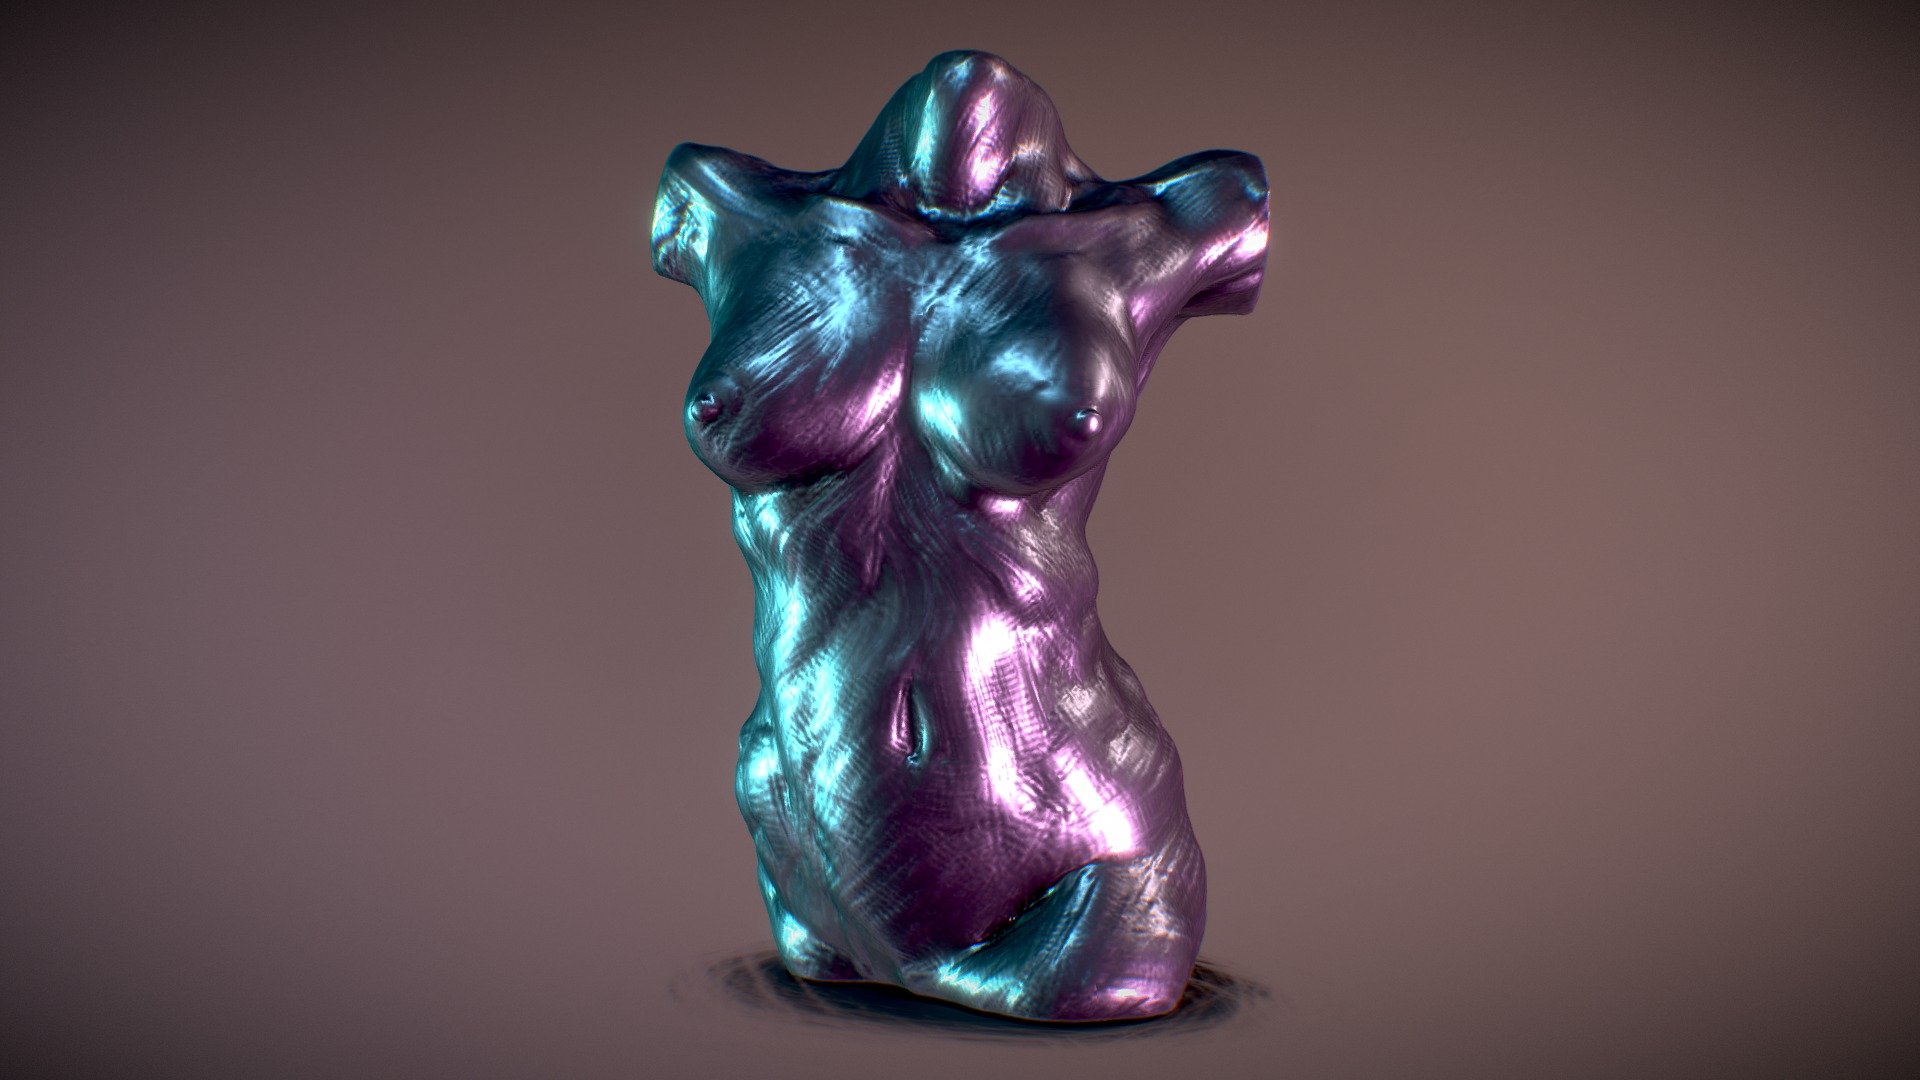 ≈55minutes
timelapse video here : https://youtu.be/7178uSglTmM
See you tomorrow !
 - SculptJanuary Day 29 : Female Torso - 3D model by redkaratz 3d model